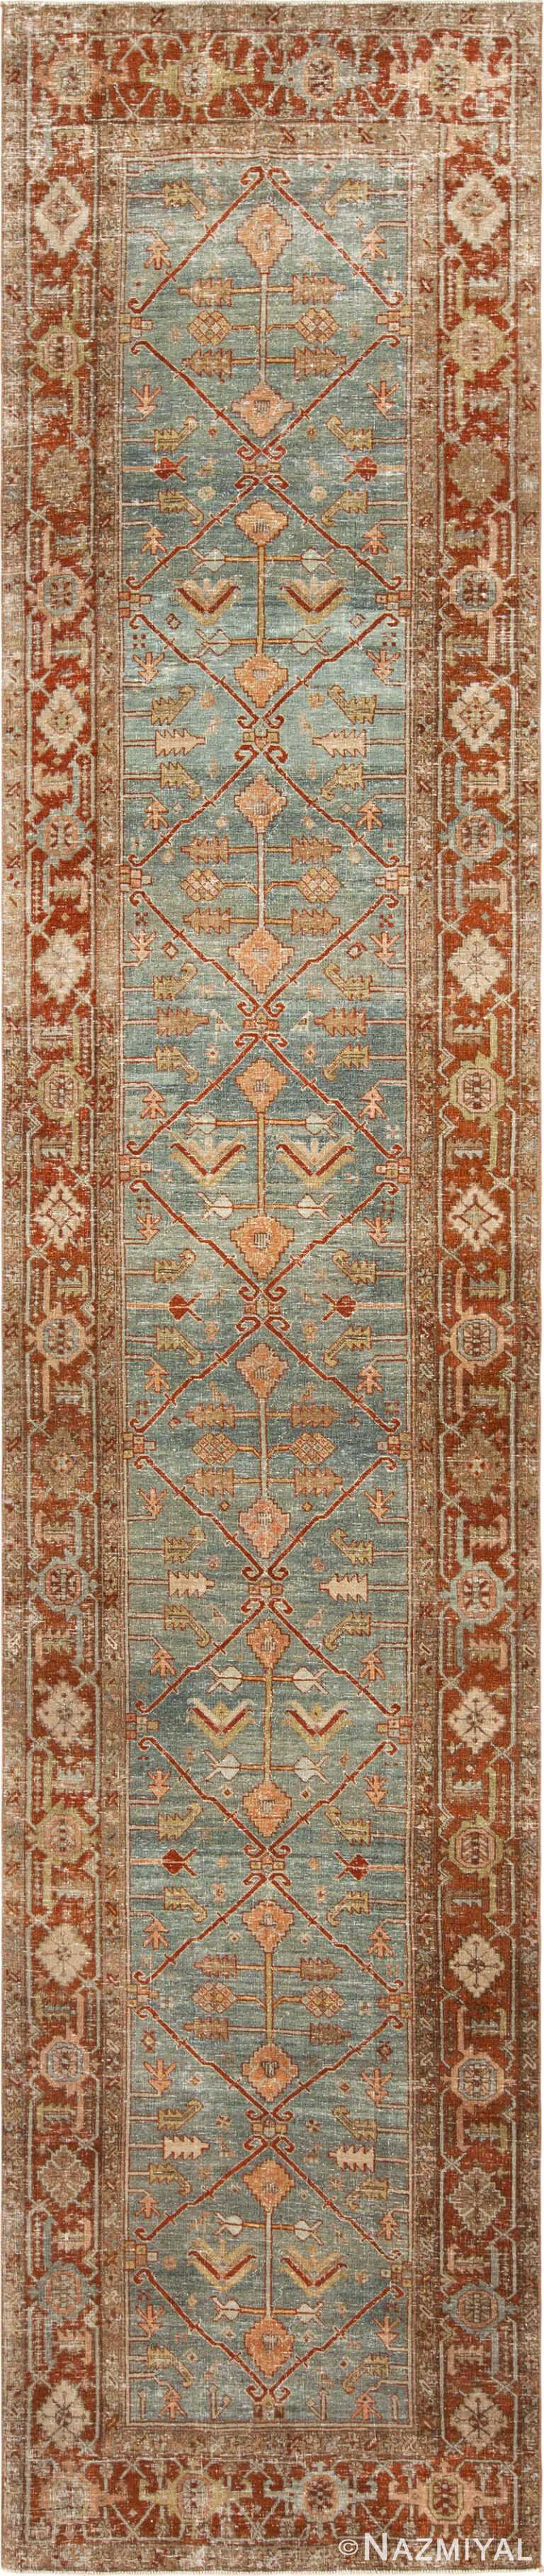 Antique Malayer Persian Blue Background Runner Rug 72836 by Nazmiyal Antique Rugs